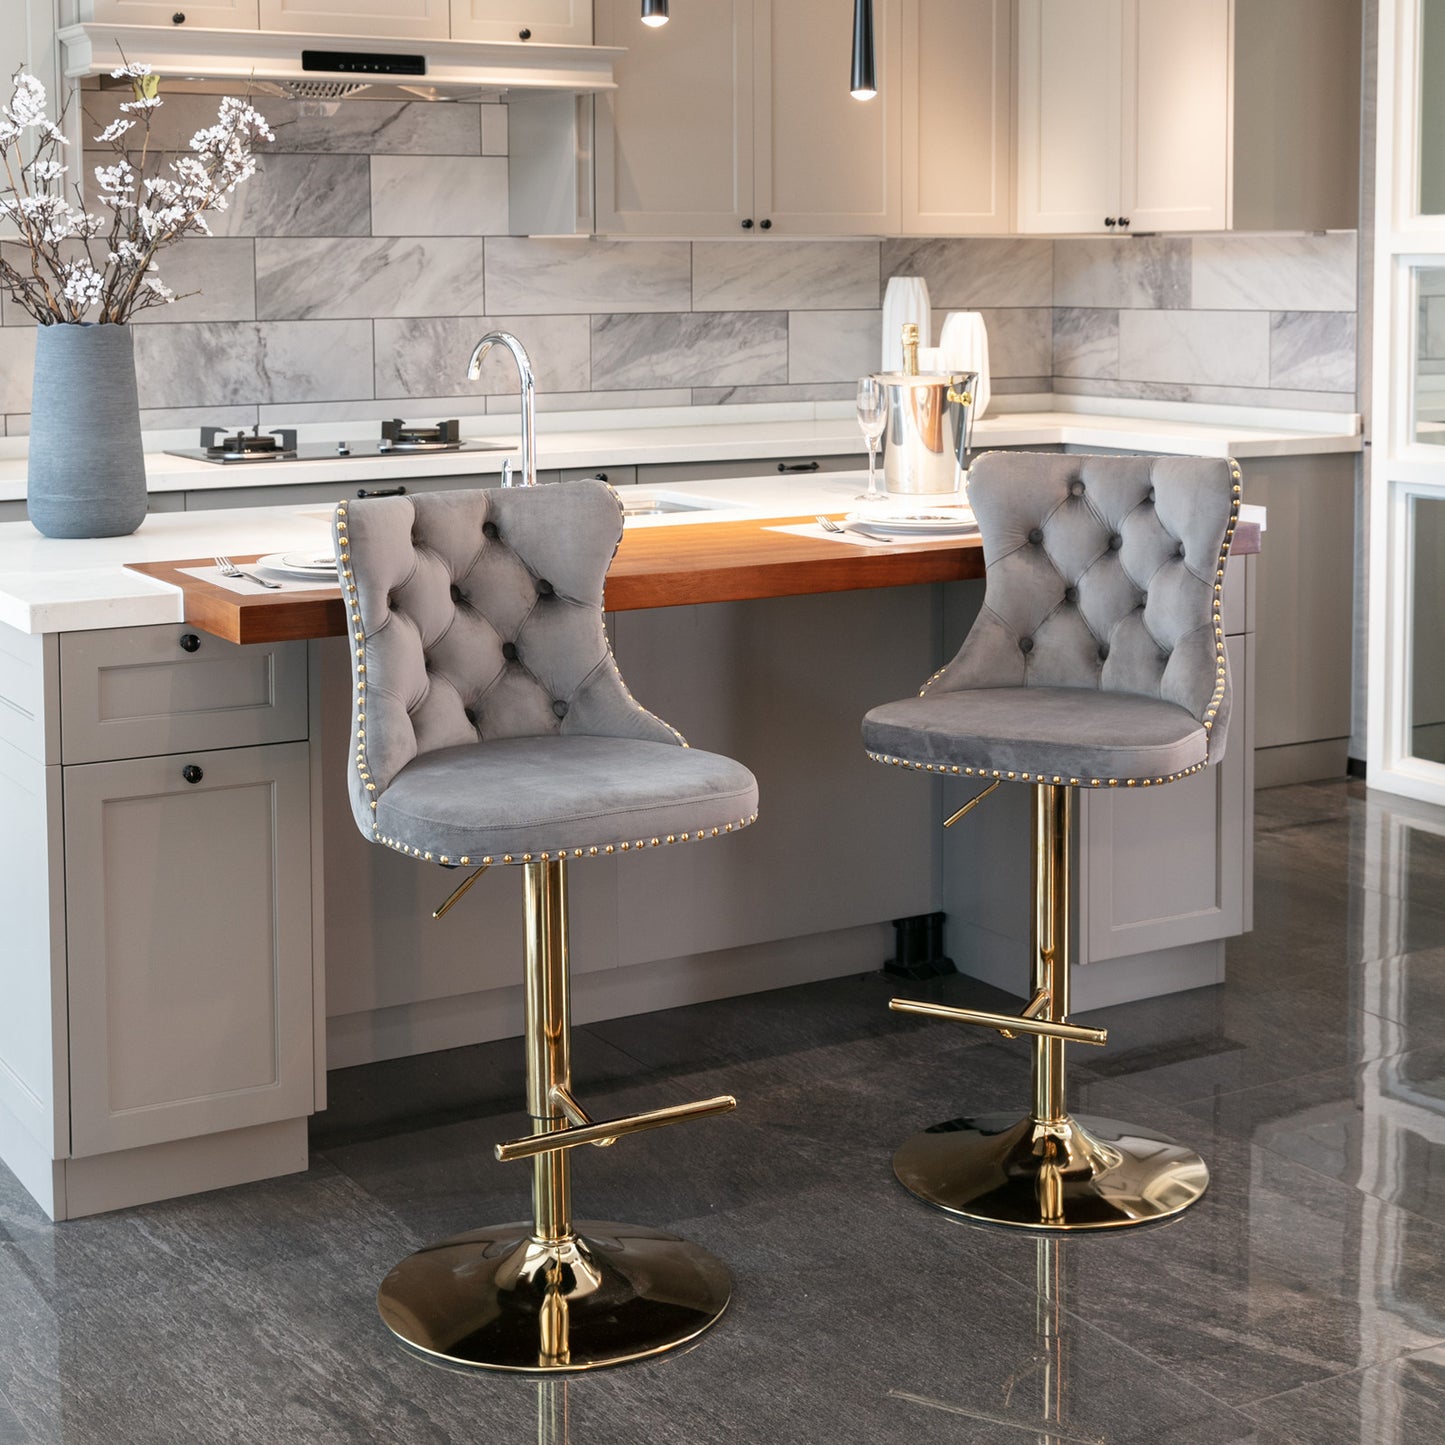 Golden Swivel Velvet Barstools Adjusatble Seat Height from 25-33 Inch, Modern Upholstered Bar Stools with Backs Comfortable Tufted for Home Pub and Kitchen IslandGray, Set of 2)